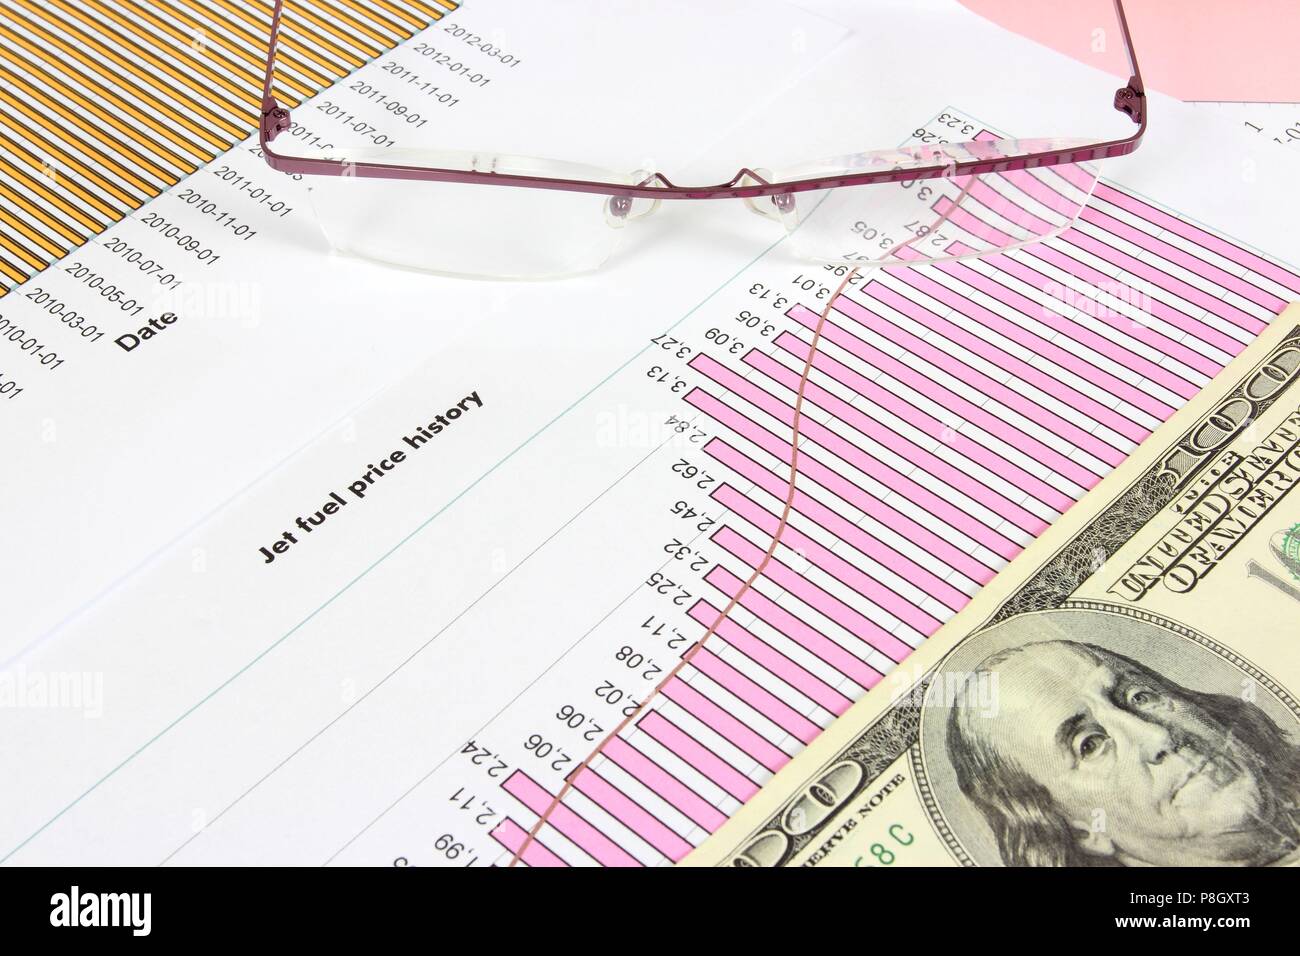 Business objects - jet fuel oil price chart, 100 US dollars and glasses. Financial concept. Stock Photo